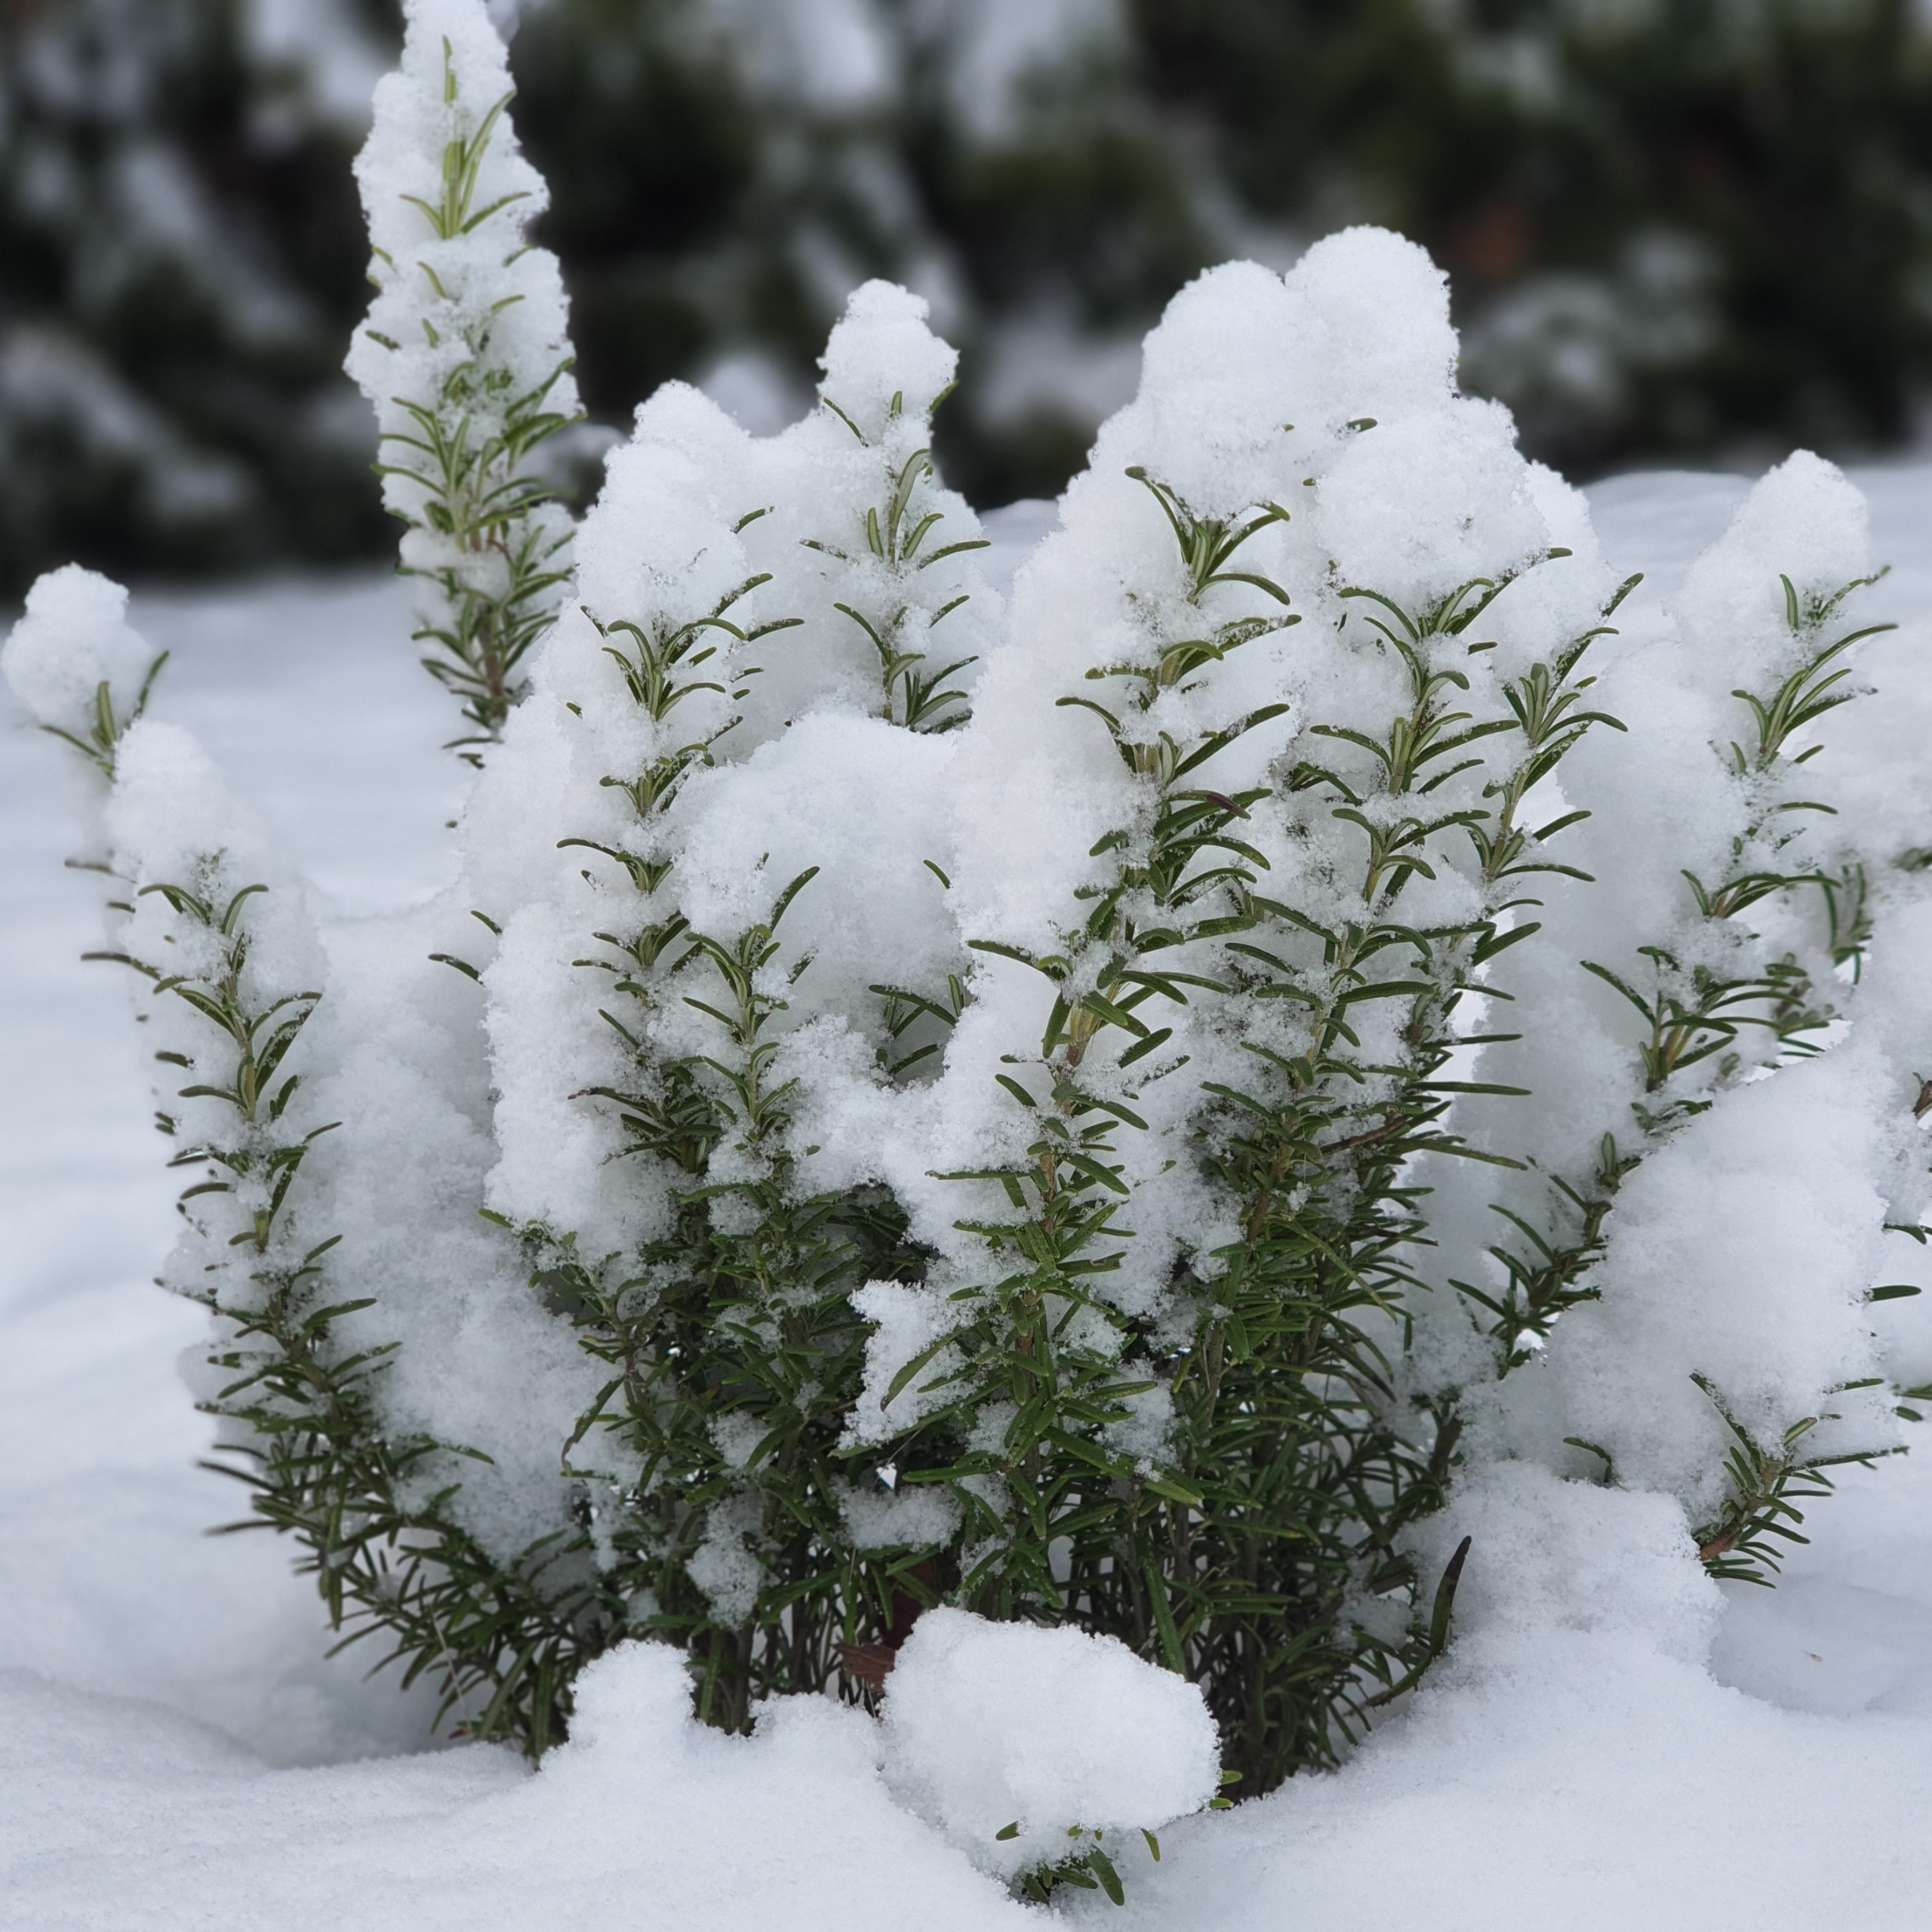 Snowy Rosemary (Winter Pictures Ιανουάριος 2021)